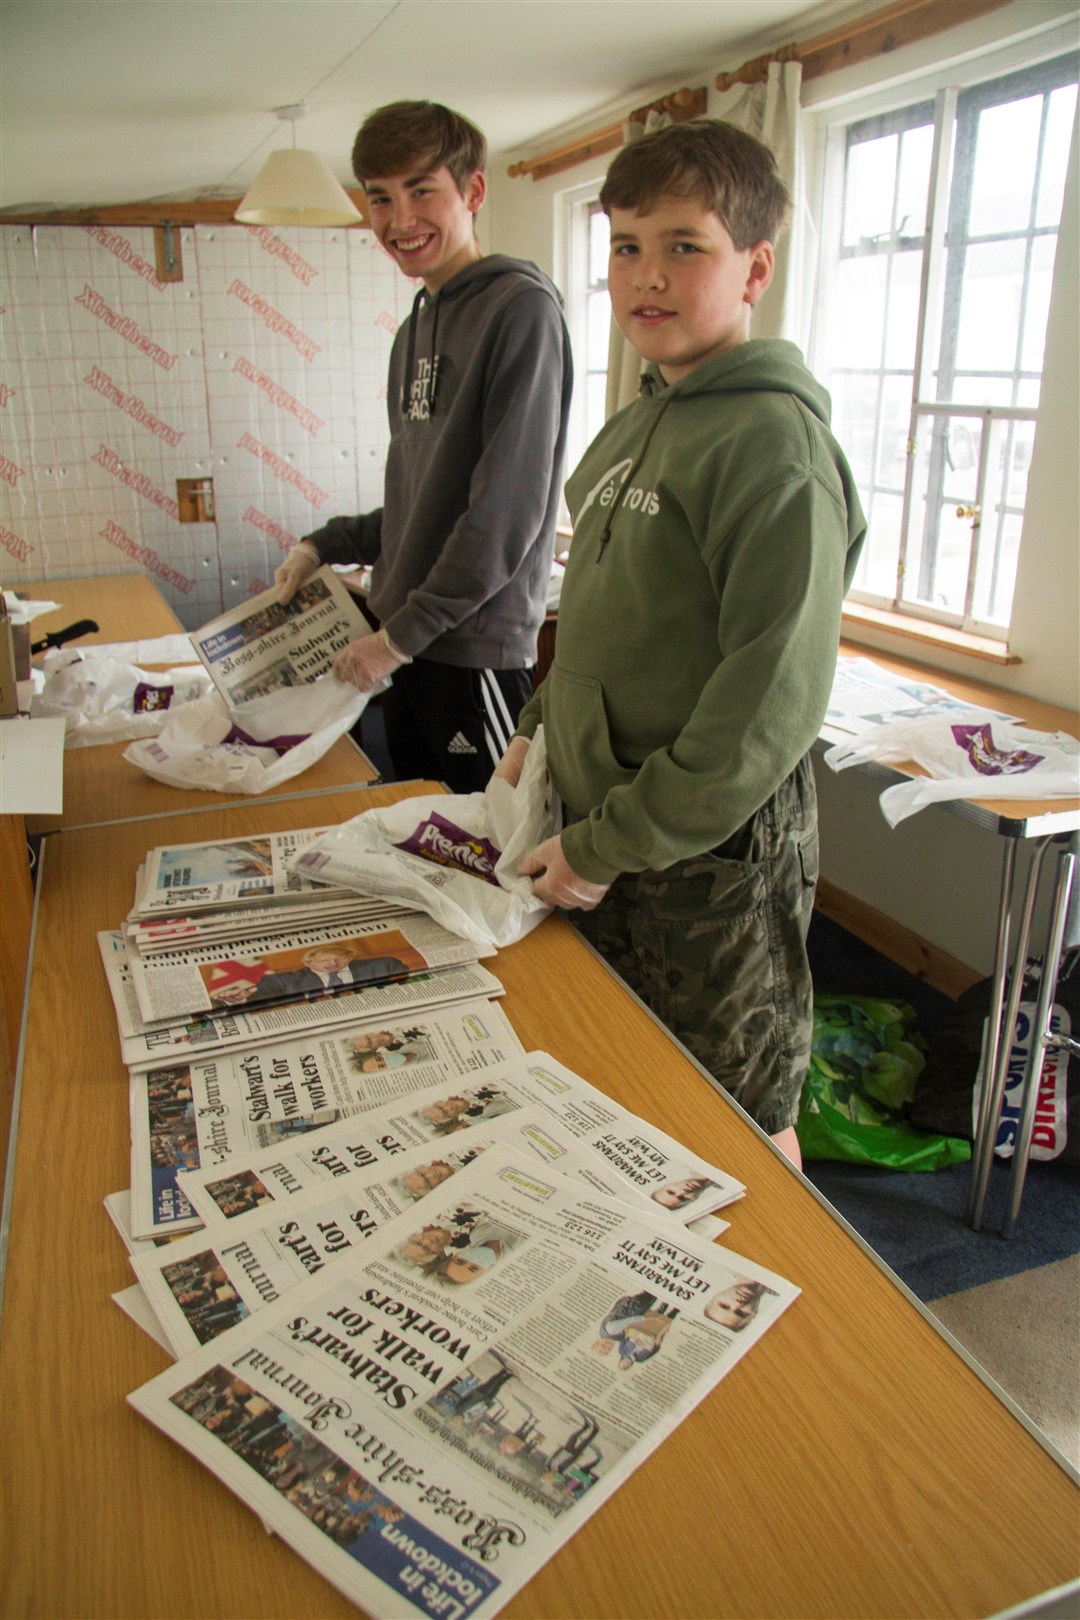 Brothers Gregor and Alastair Fox get the papers' order sorted out.